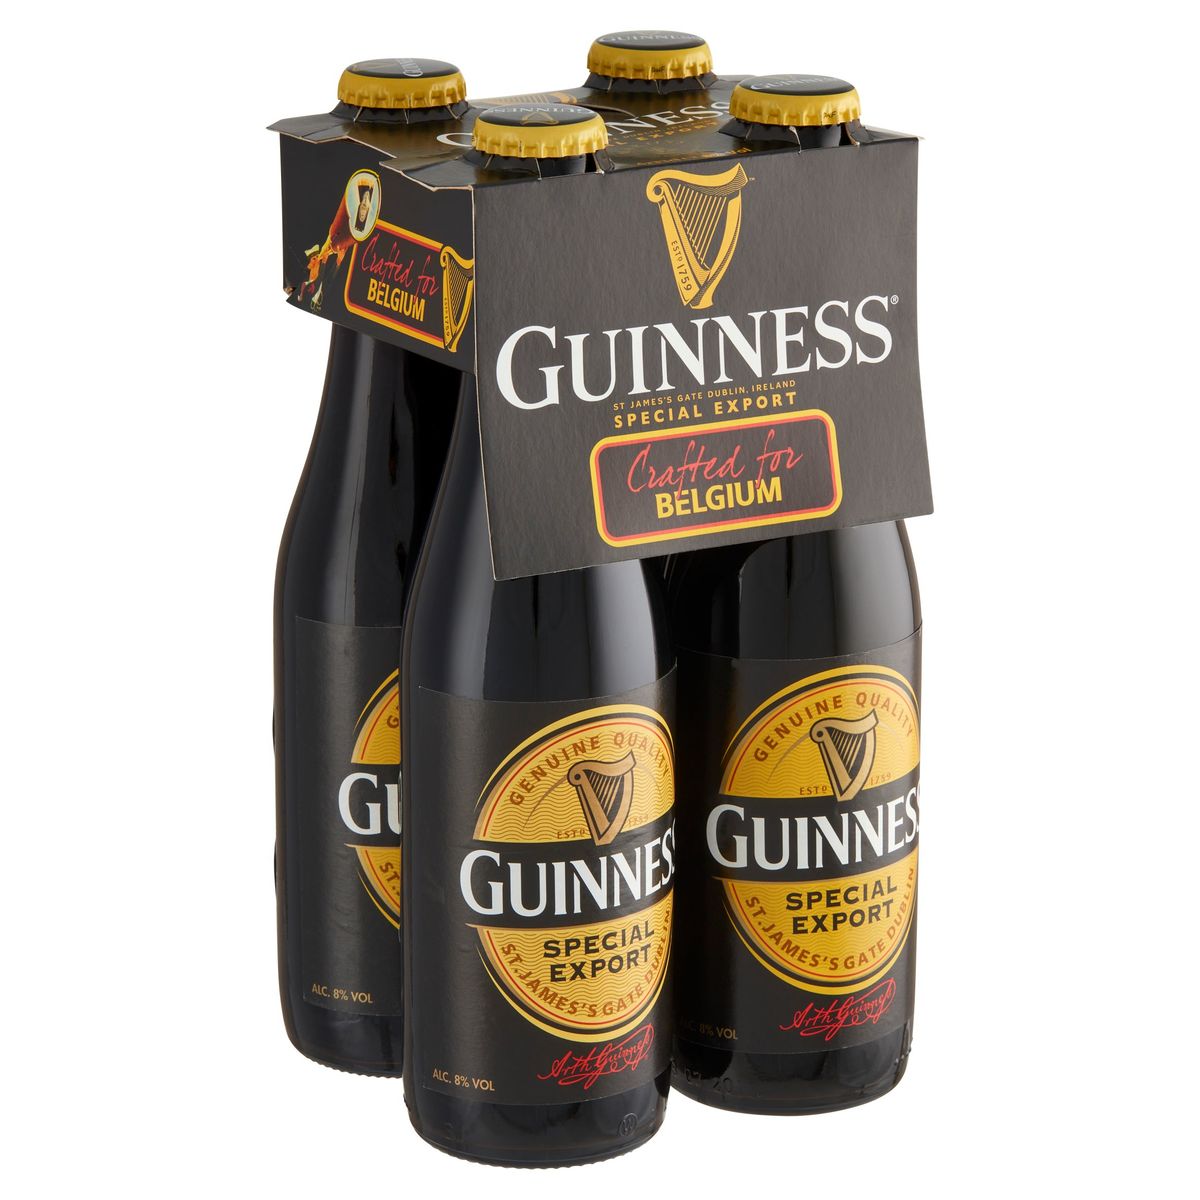 Guinness Special Export Bouteilles 4 x 33 cl